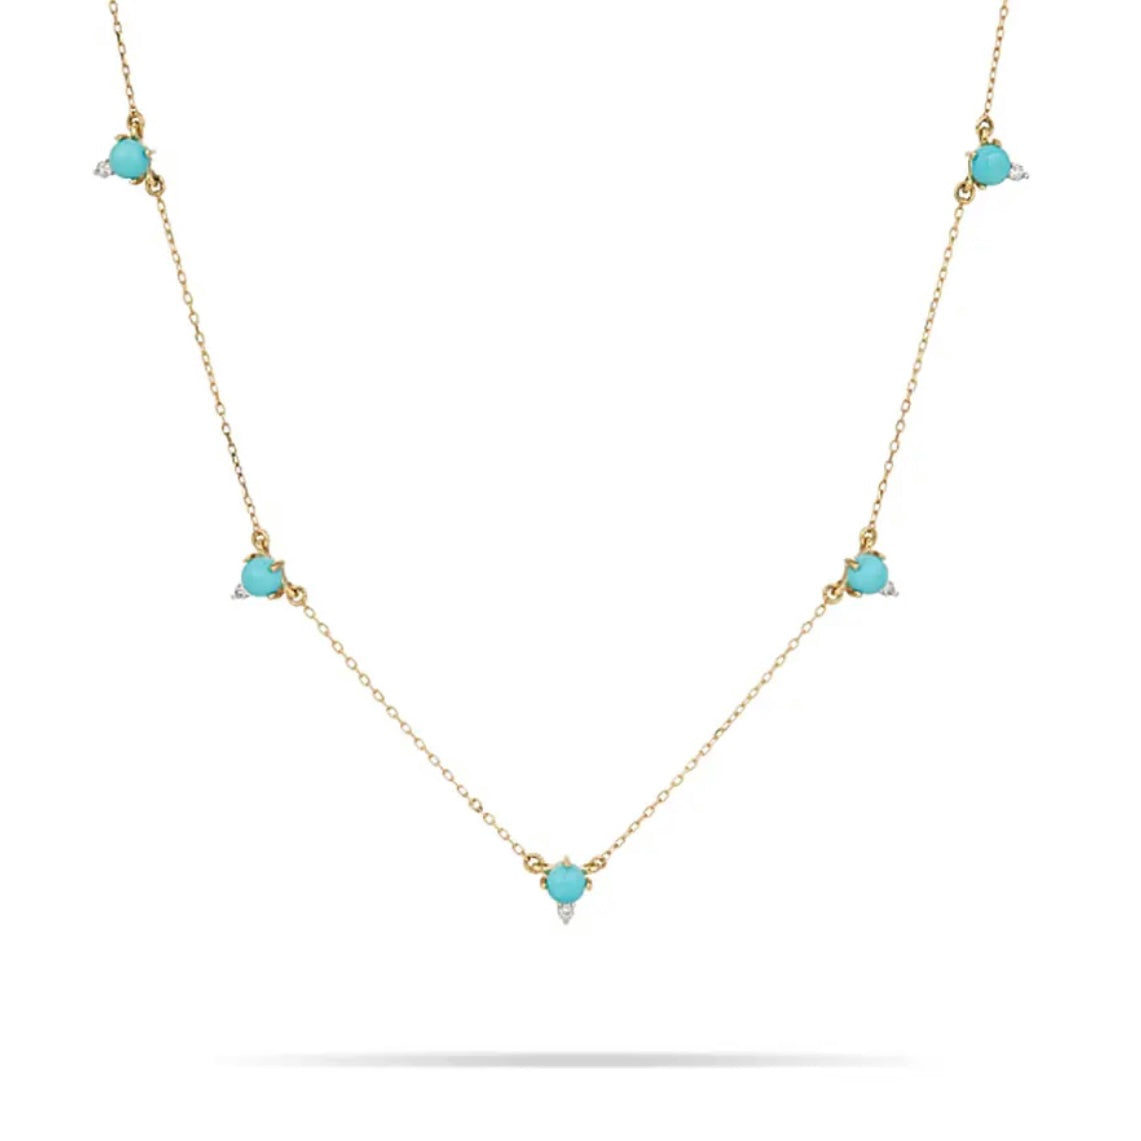 ACKERLEA STERLING SILVER DAINTY TURQUOISE NECKLACE